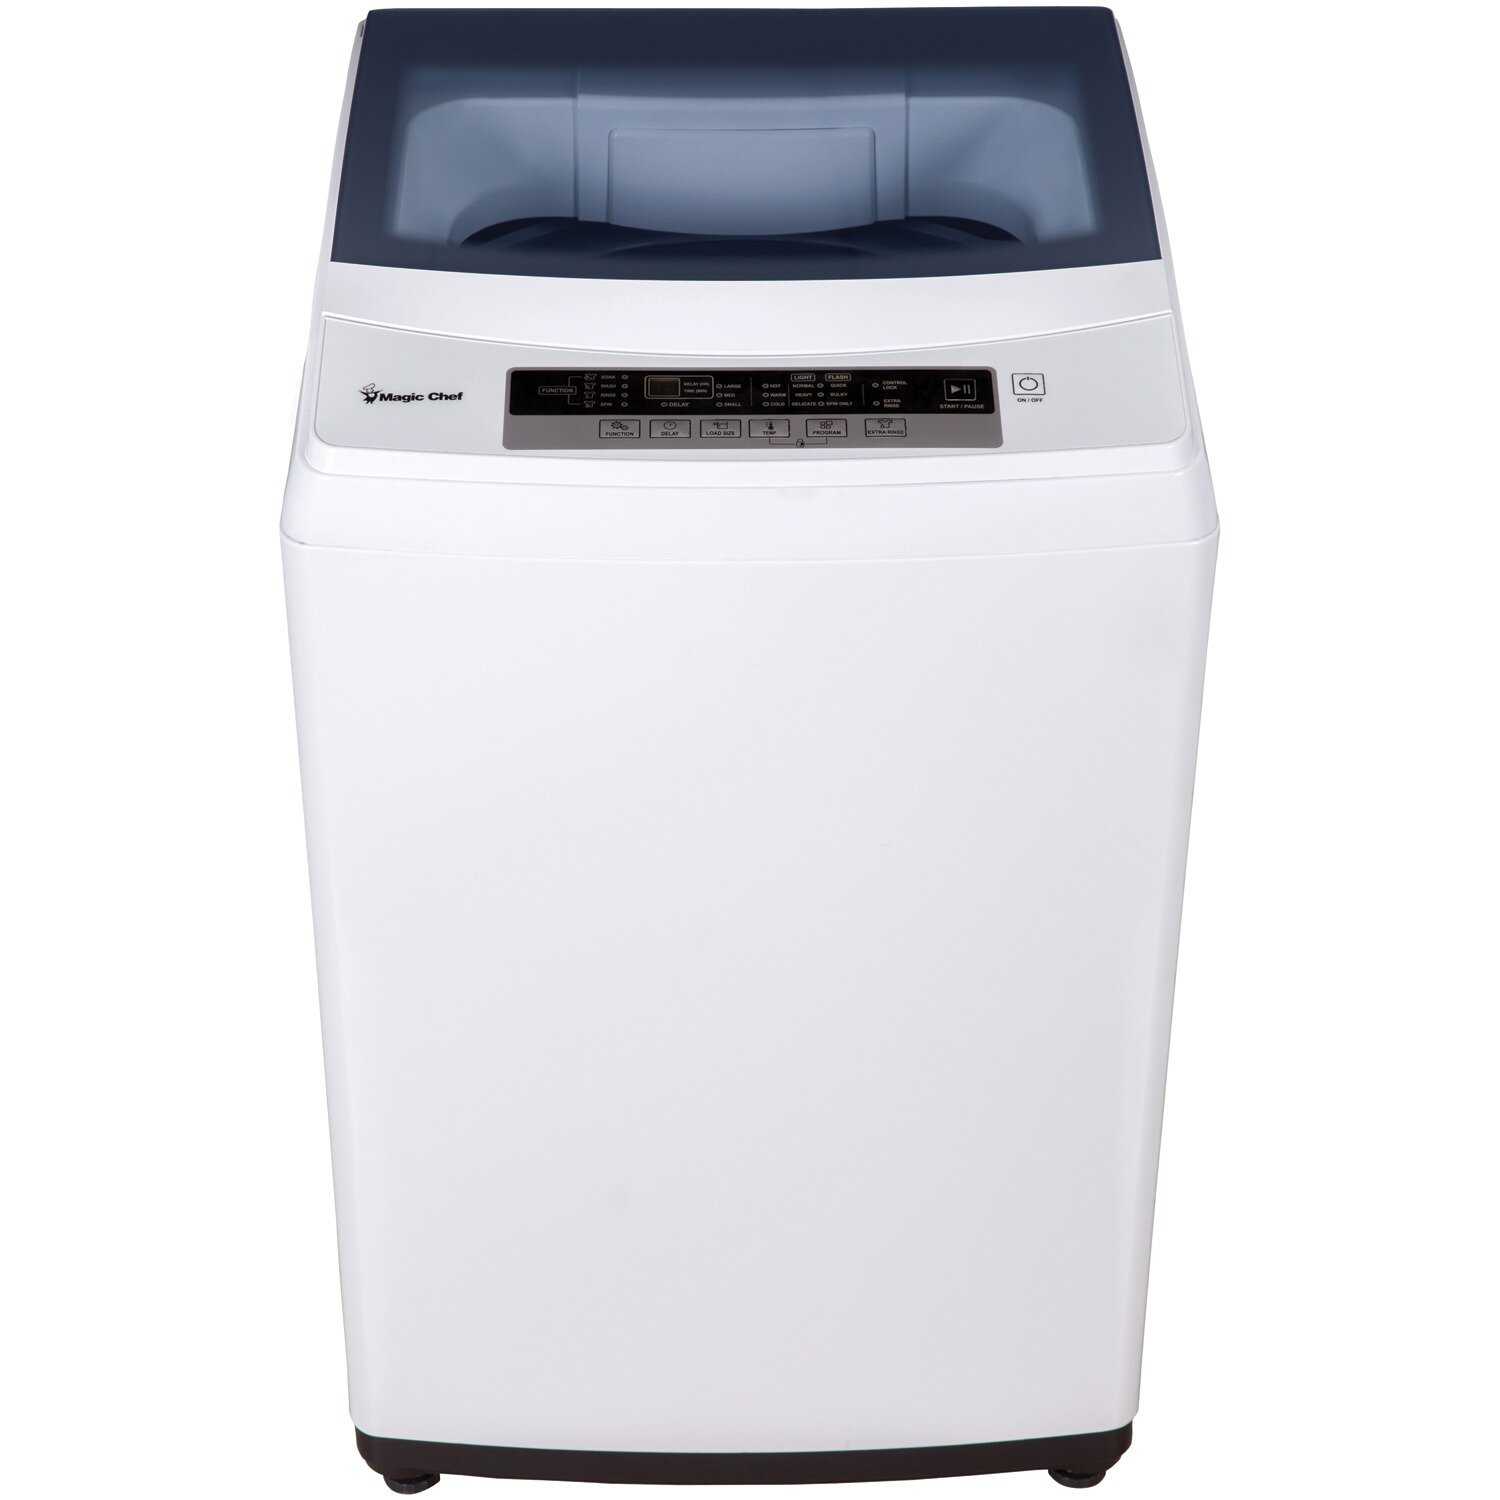 Magic Chef 2 0 Cu Ft Portable Top Load Washer Reviews Wayfair